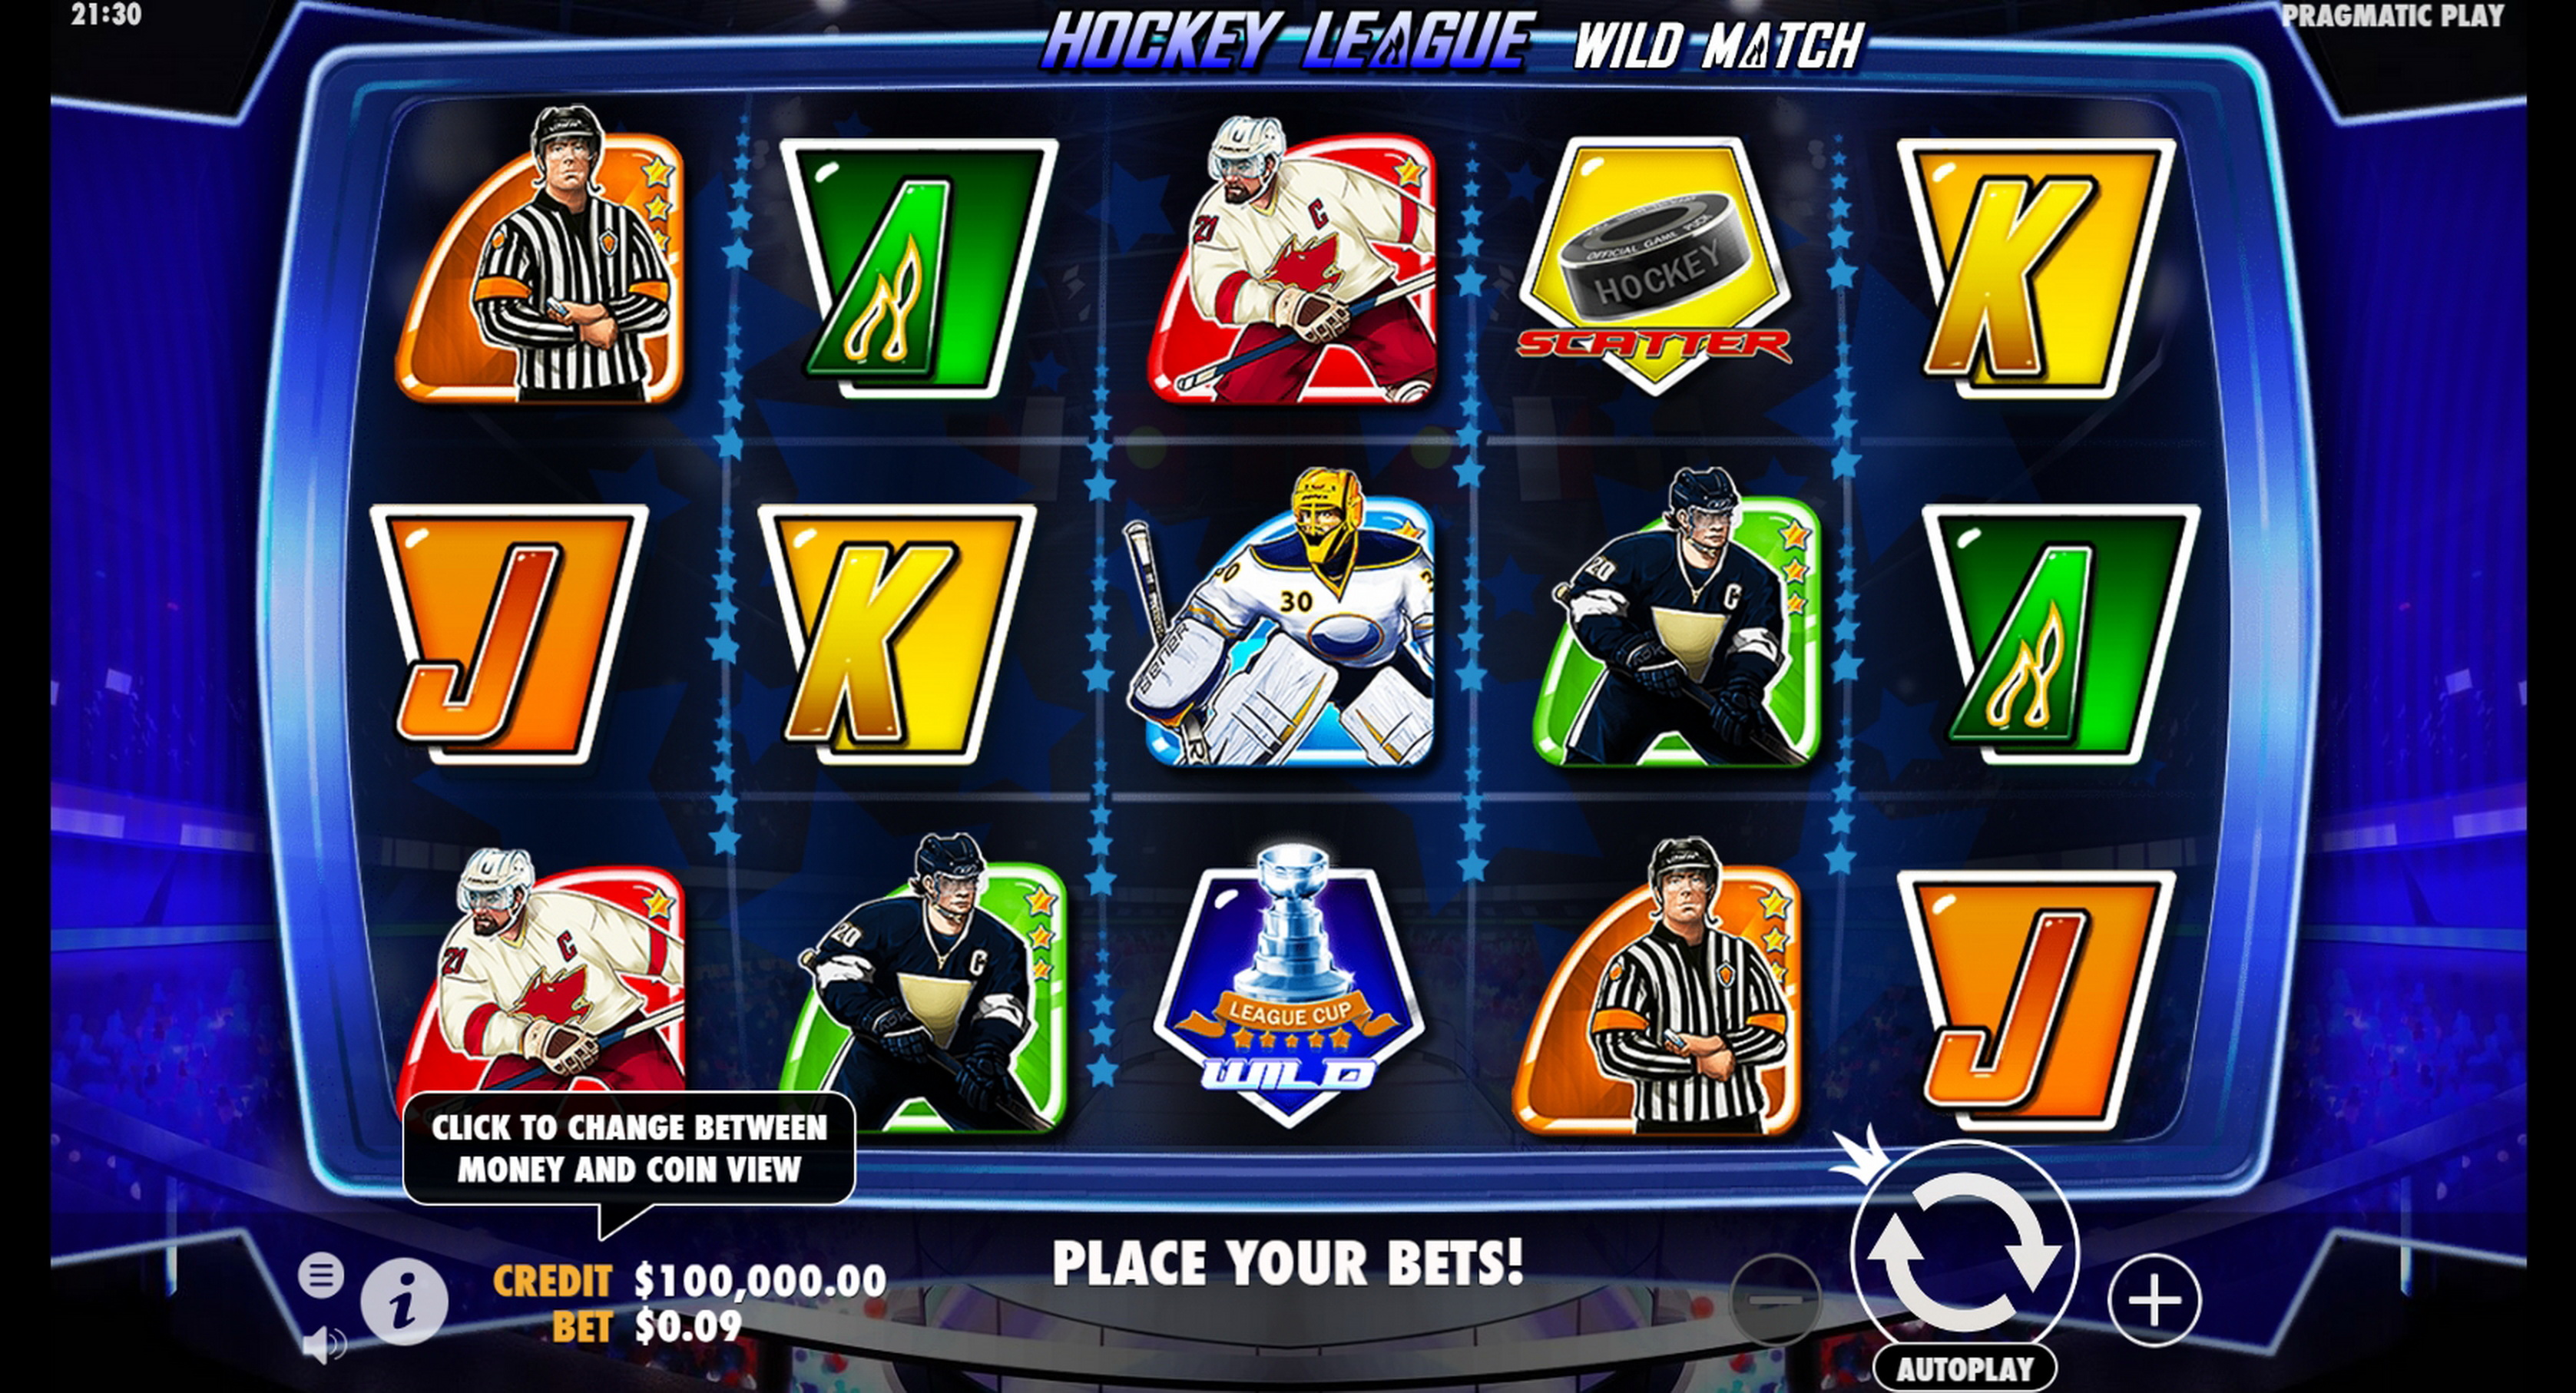 Reels in Hockey League Wild Match Slot Game by Pragmatic Play